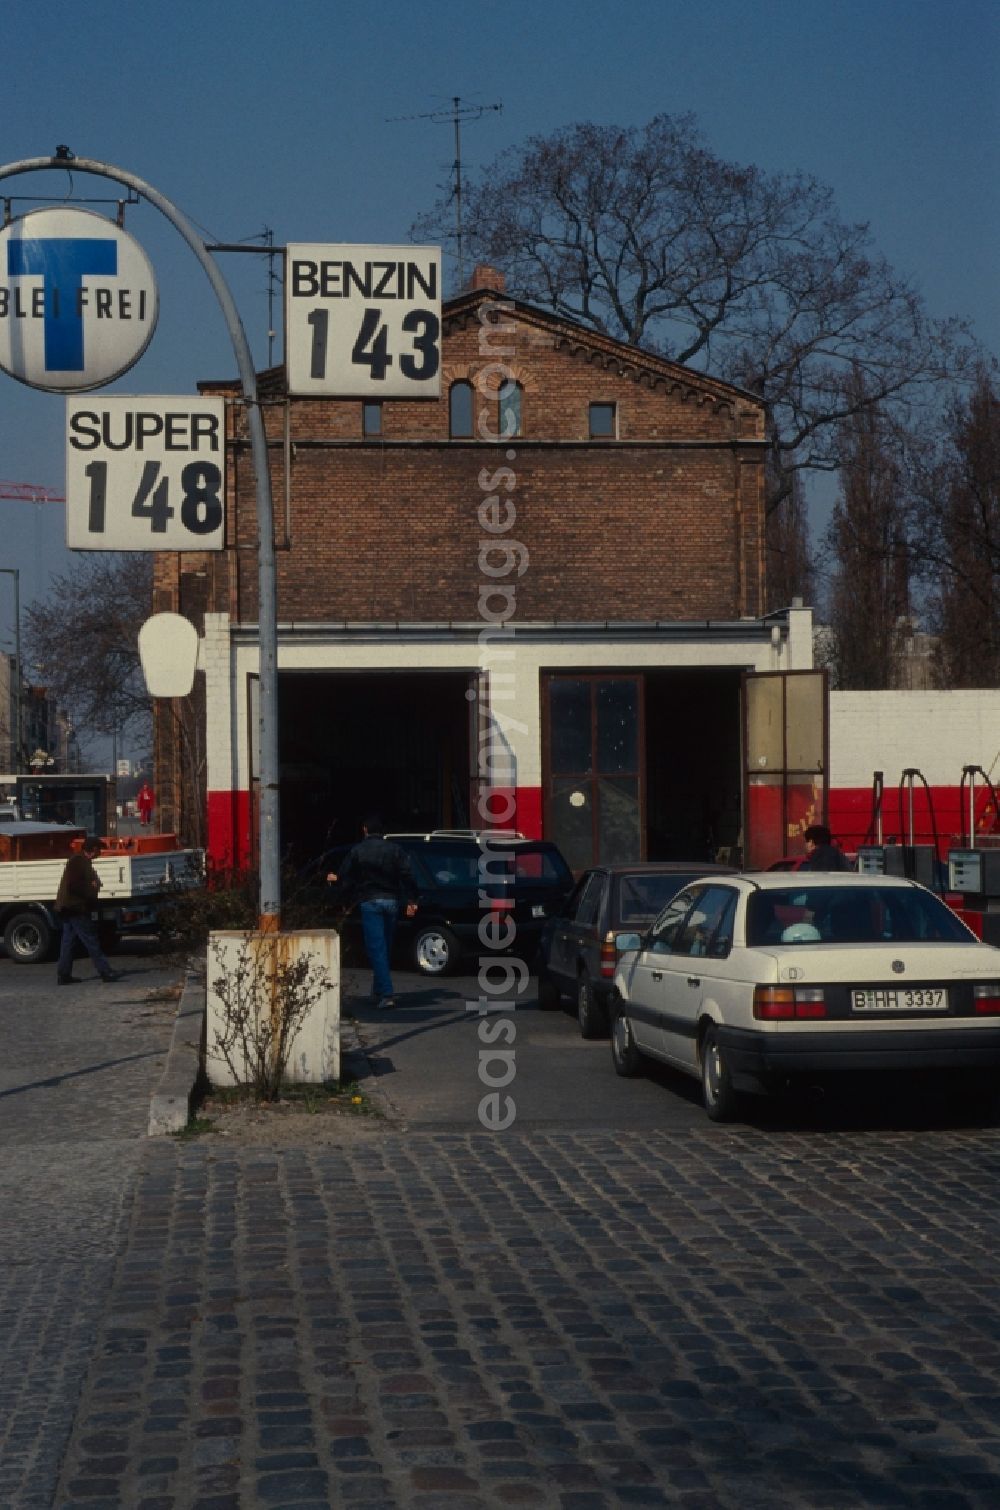 GDR photo archive: Berlin - Kreuzberg - At the end of the Silesian street is the oldest petrol station in Berlin. The petrol station is a listed building